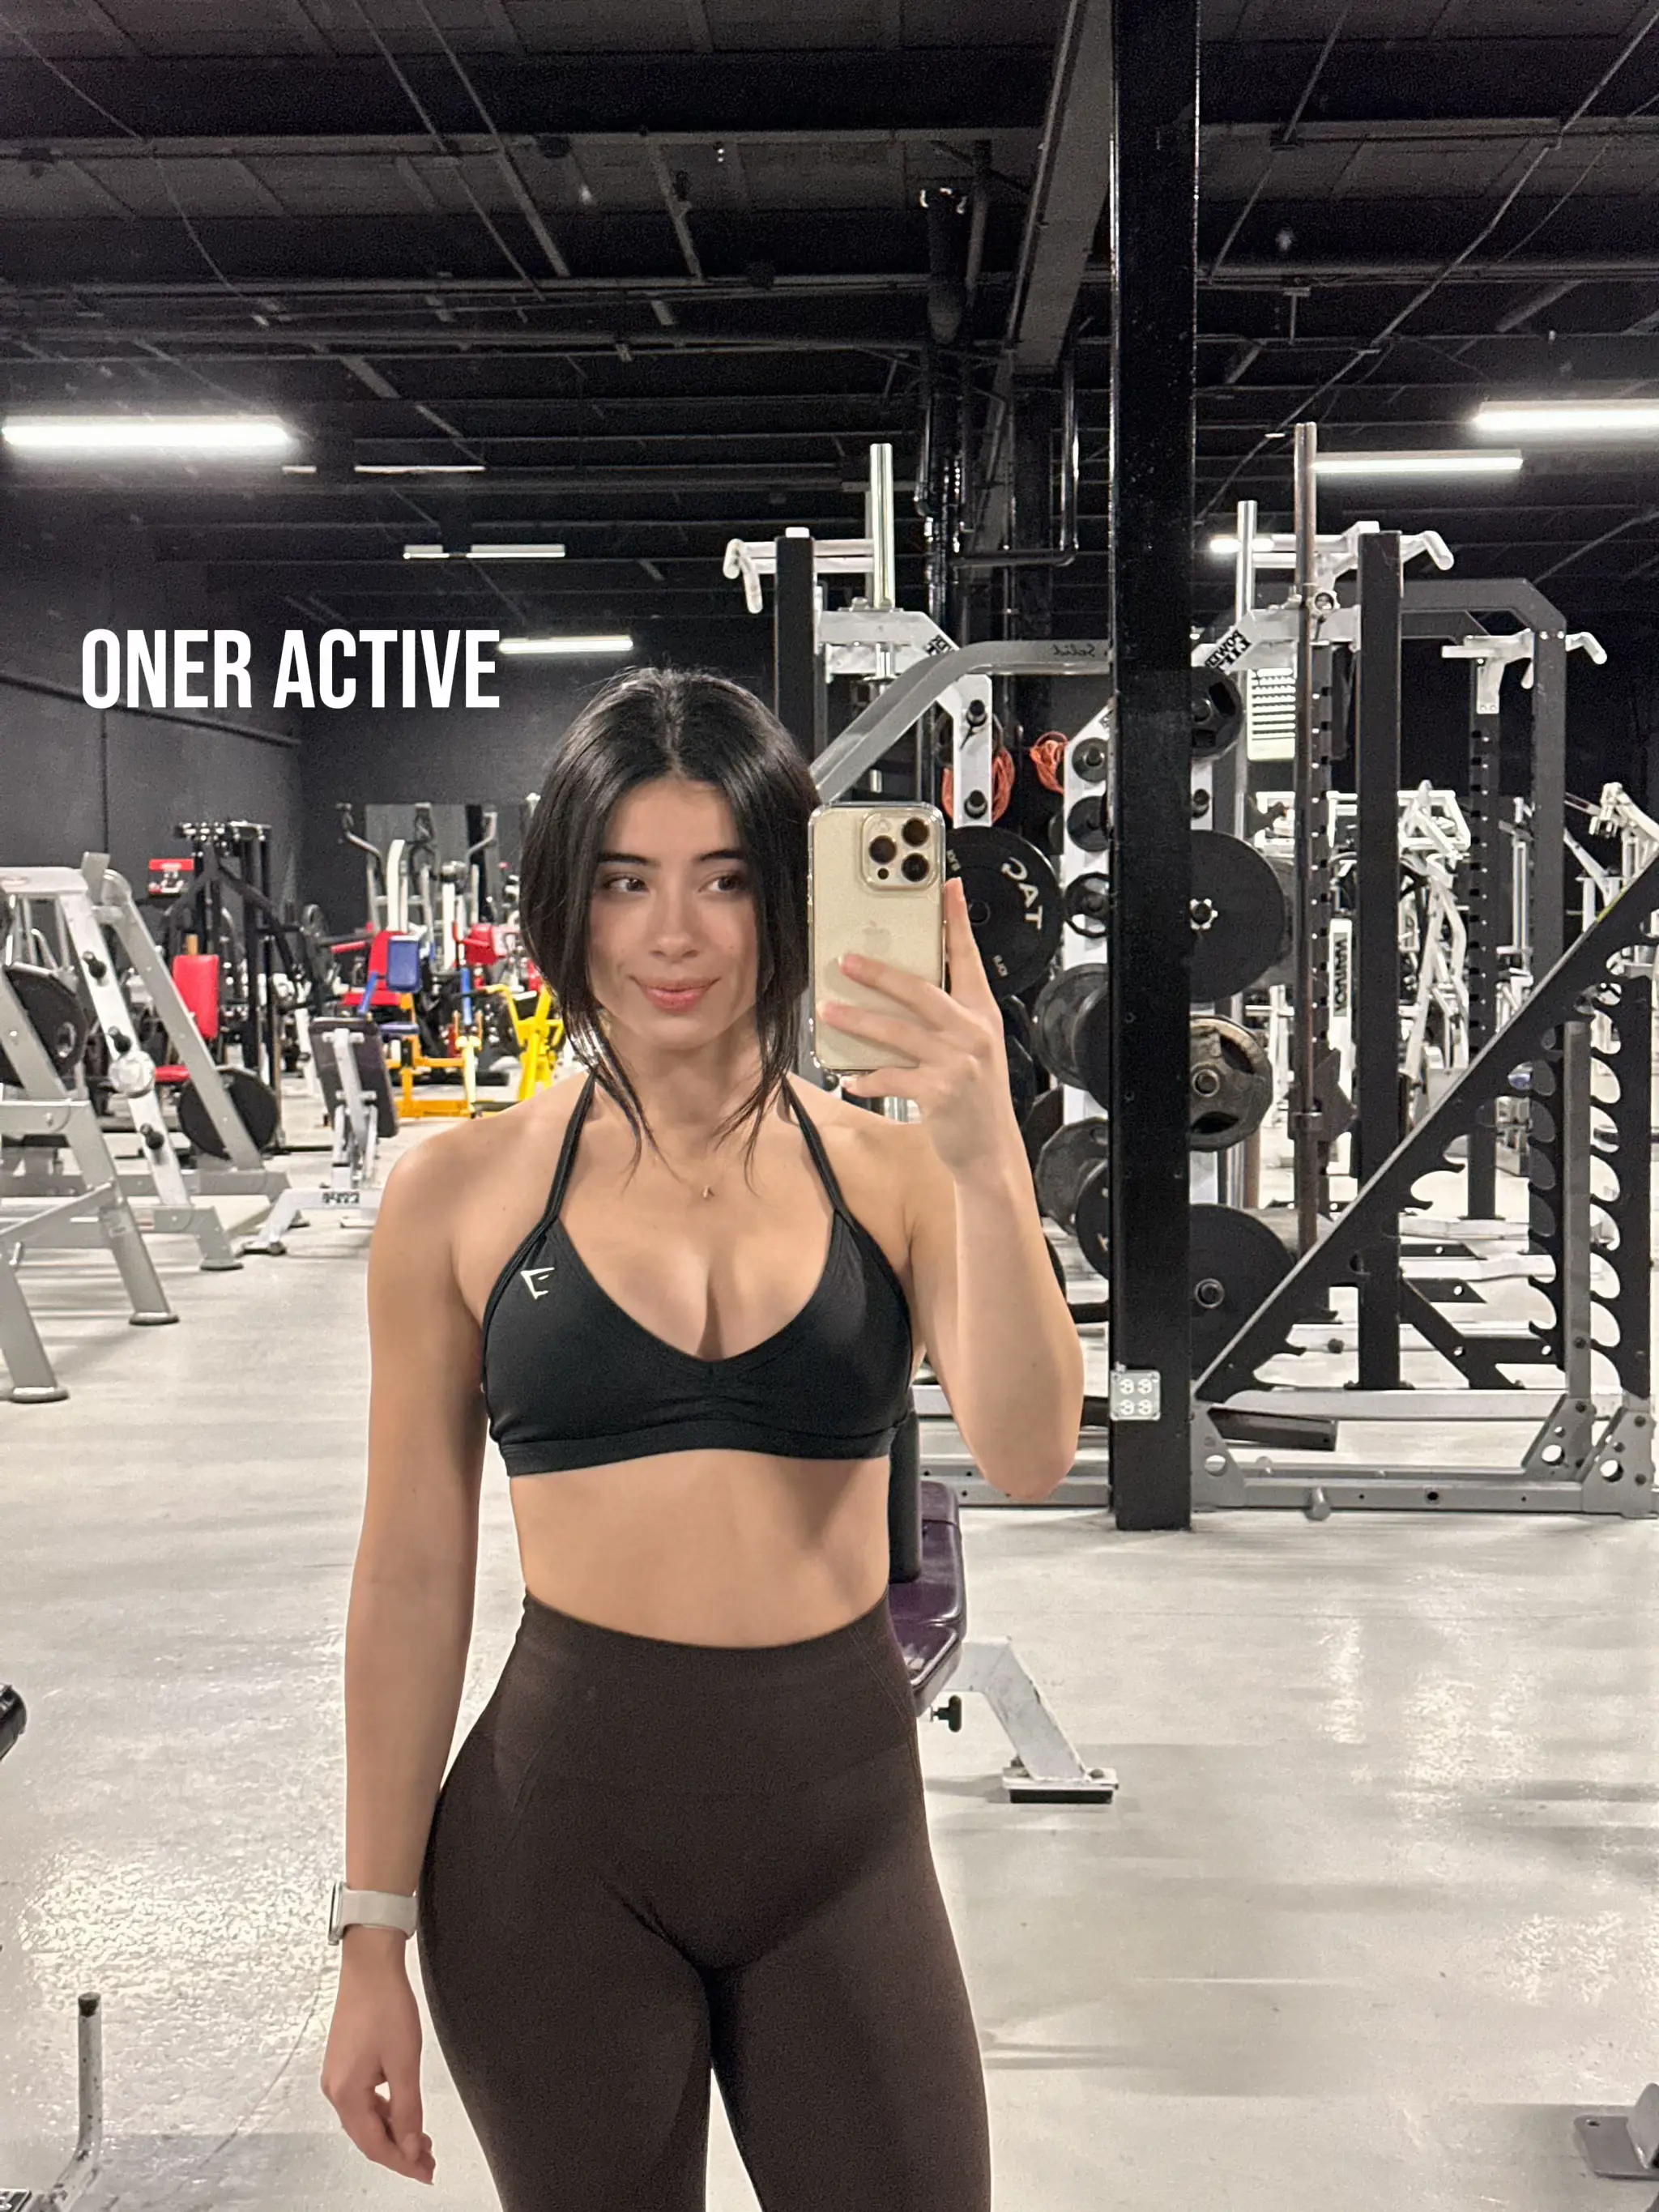 Best gym clothes, Gallery posted by Aliandra